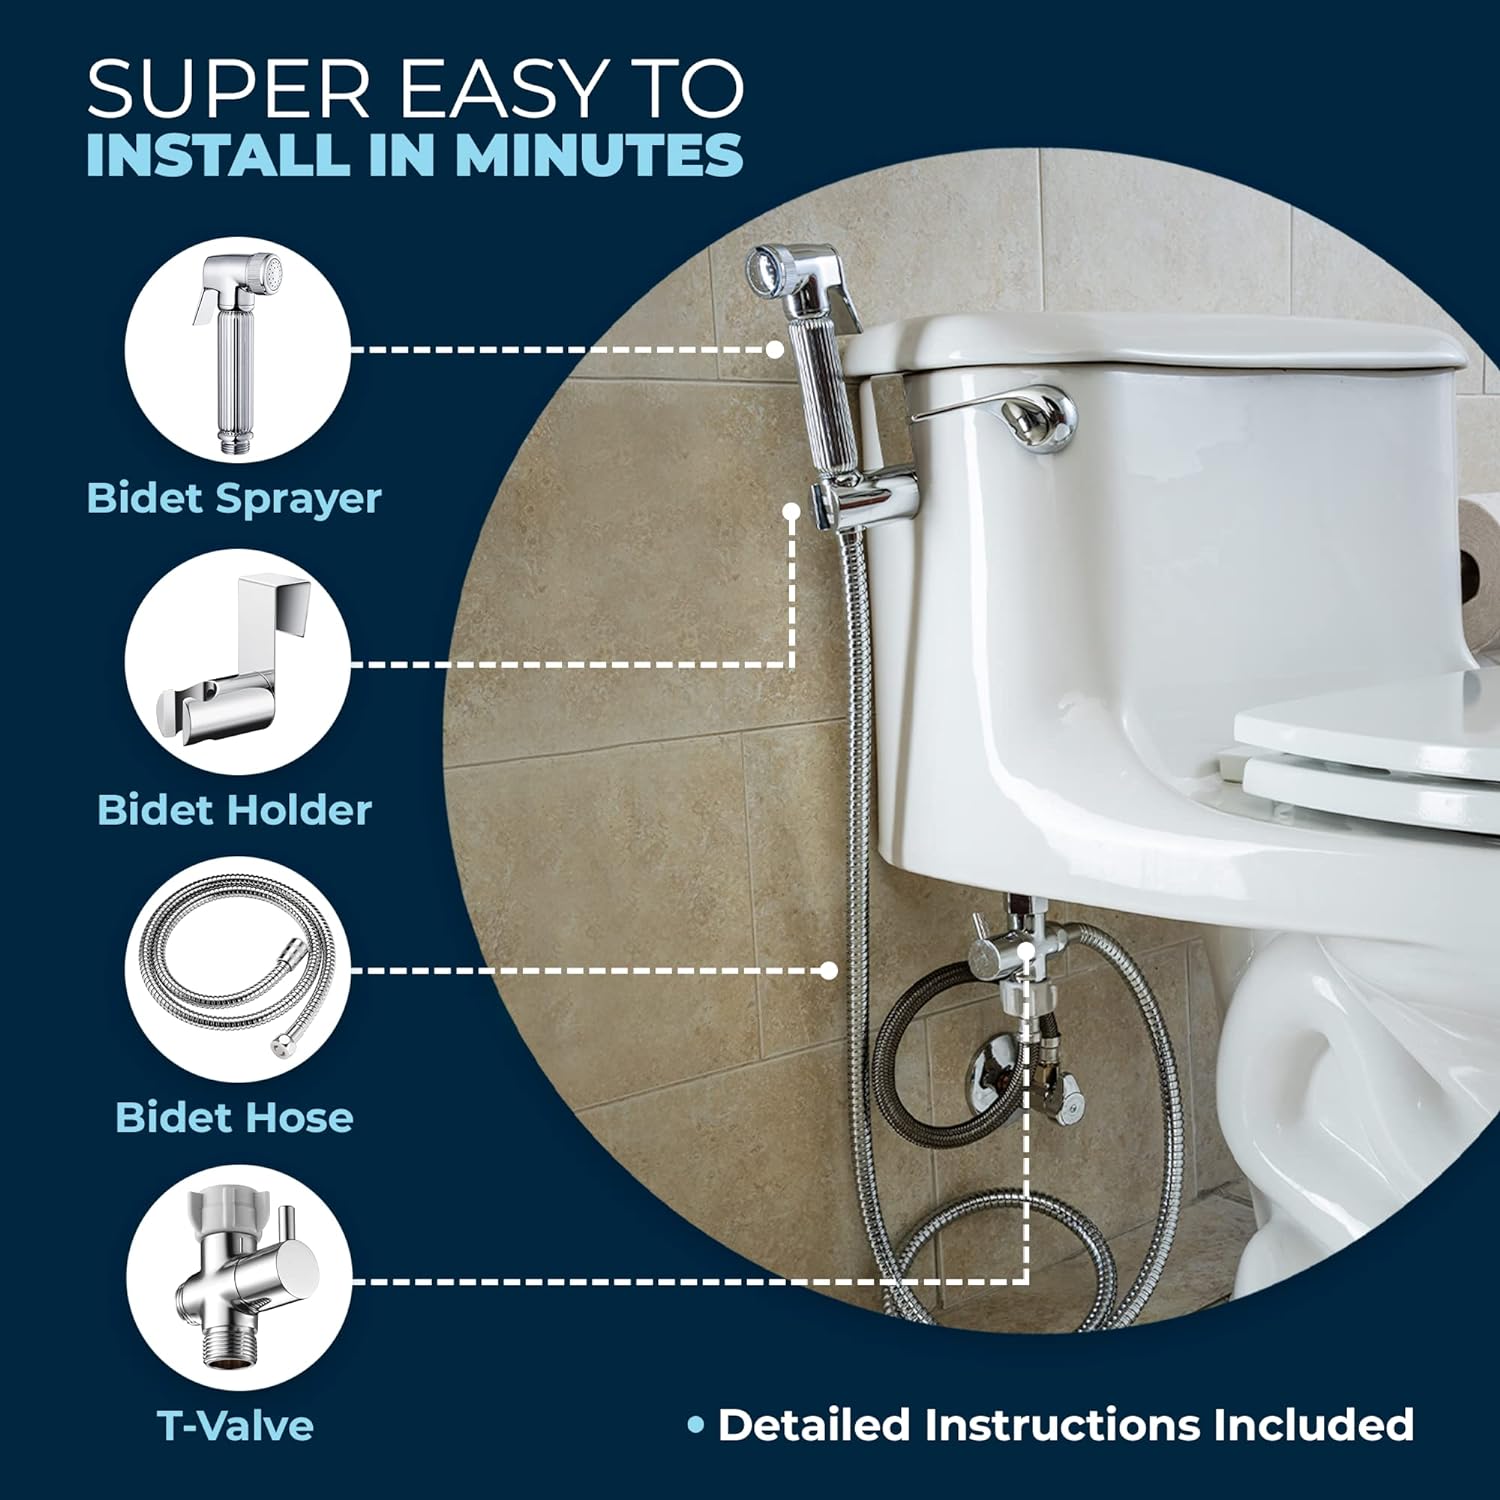 HammerHead Showers All Metal Handheld Bidet Sprayer for Toilet, Chrome | Universal T-Valve Adapter Attachment | Perfect Toilet Paper Substitute |